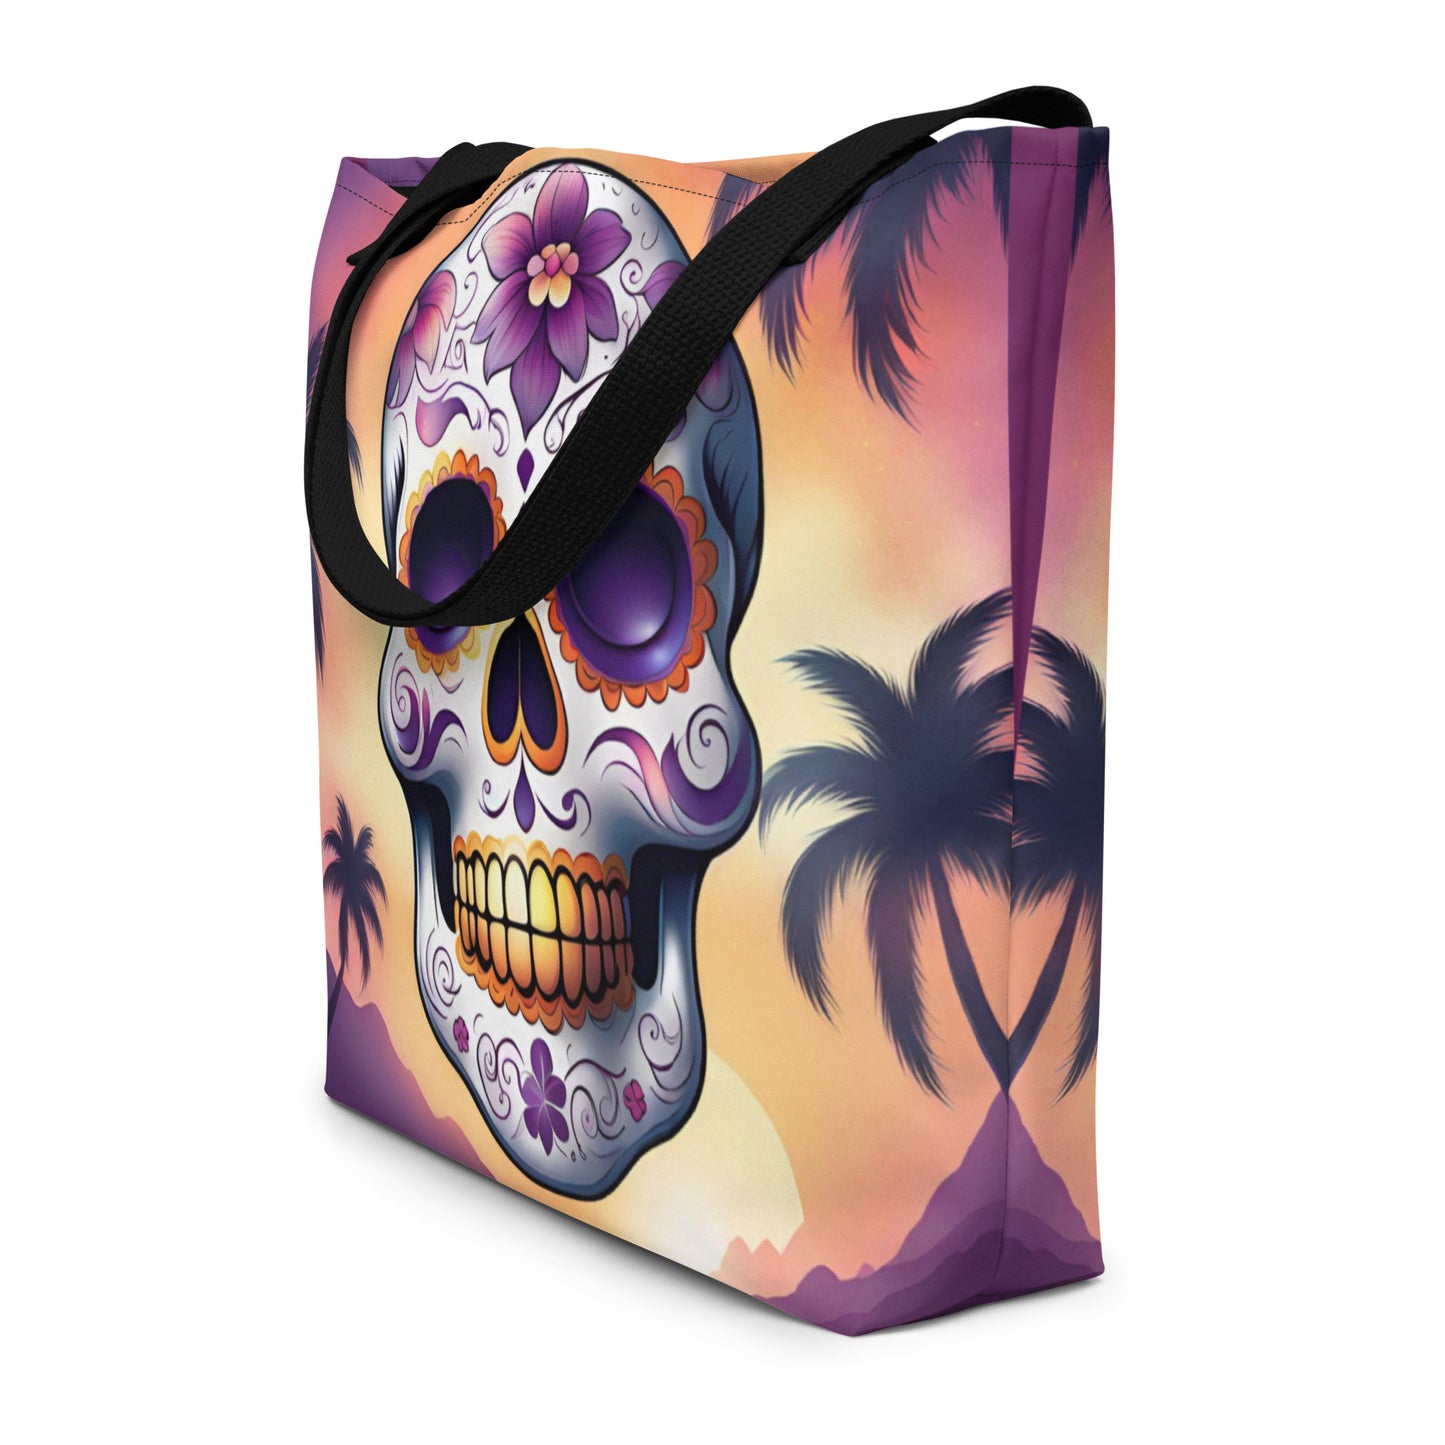 PINK SUNSET SKULL LARGE BEACH TOTE